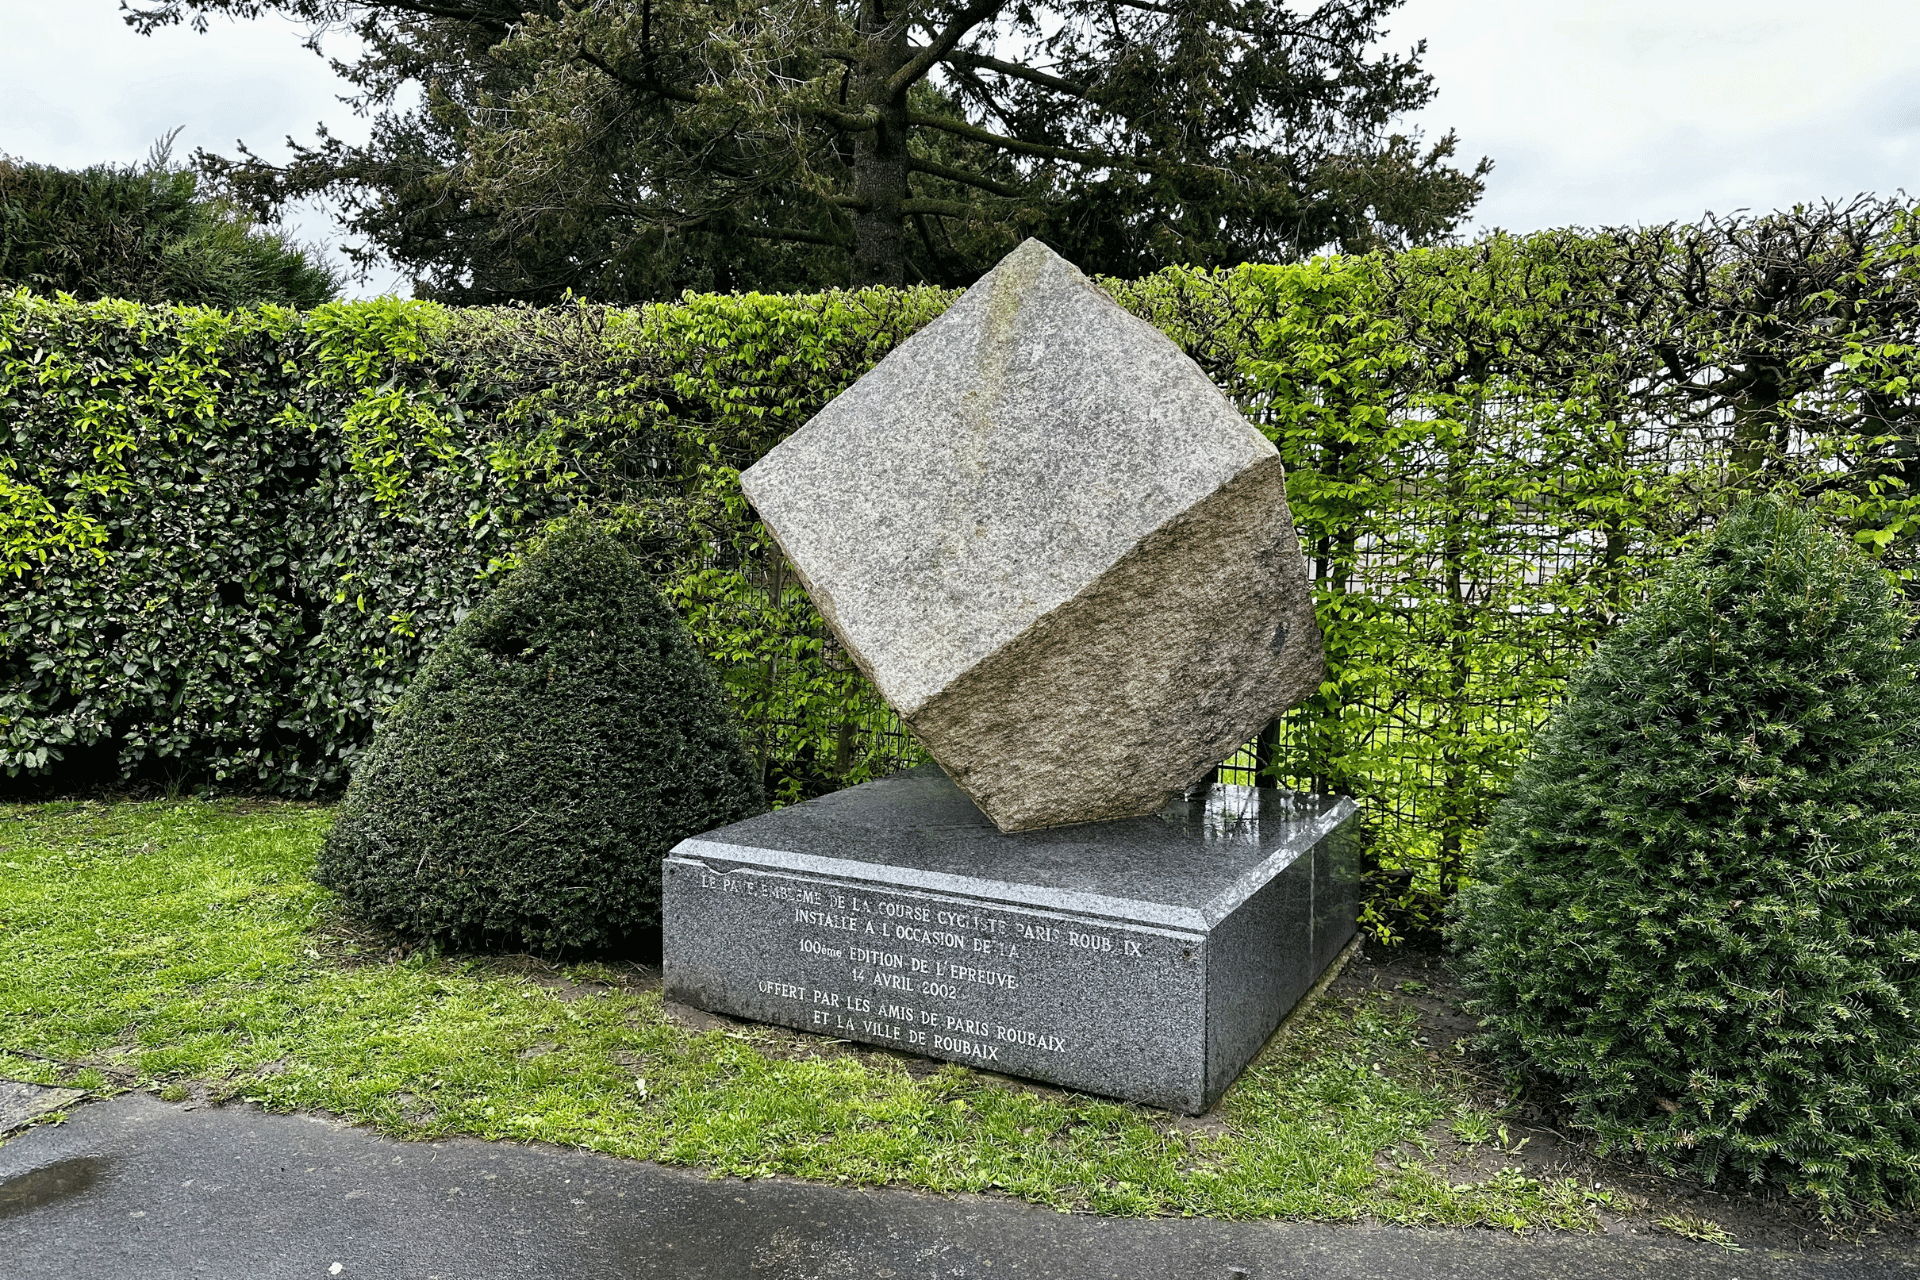 A civic monument featuring a large cubic cobblestone. Conical bushes to the left and right frame the monument. The inscription on the plinth reads "The cobble, emblematic of Paris-Roubaix, was installed in commemoration of the 100th edition of the race on April 14th 2002. Made possible by 'The Friends of Paris-Roubaix' and the town of Roubaix" (translated from French)